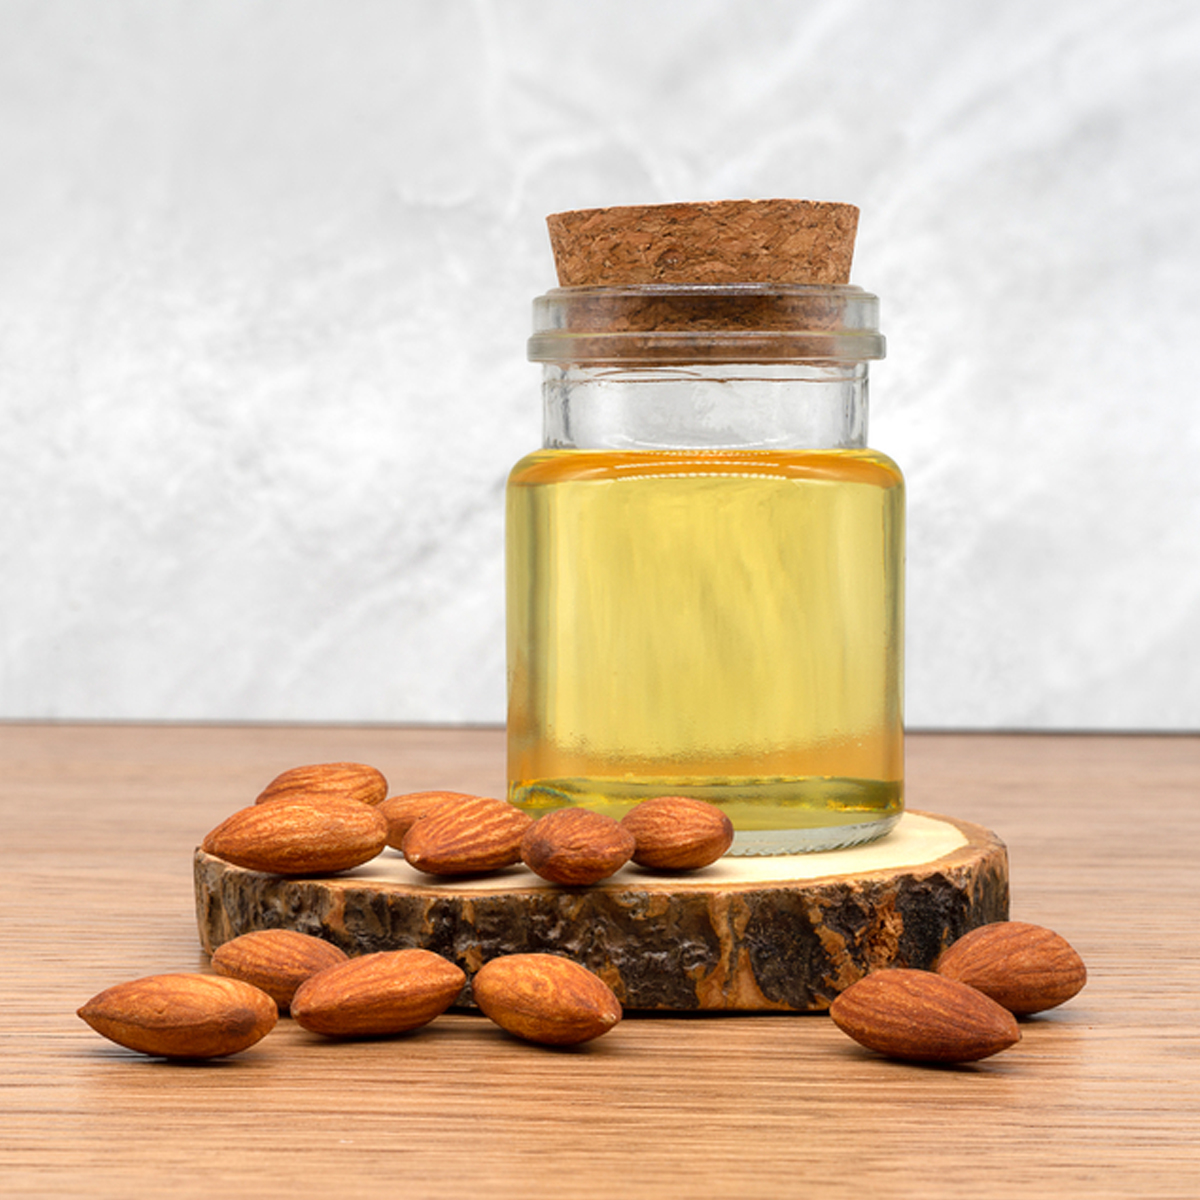 A jar of almond oil sitting on a piece of wood surrounded by almonds.